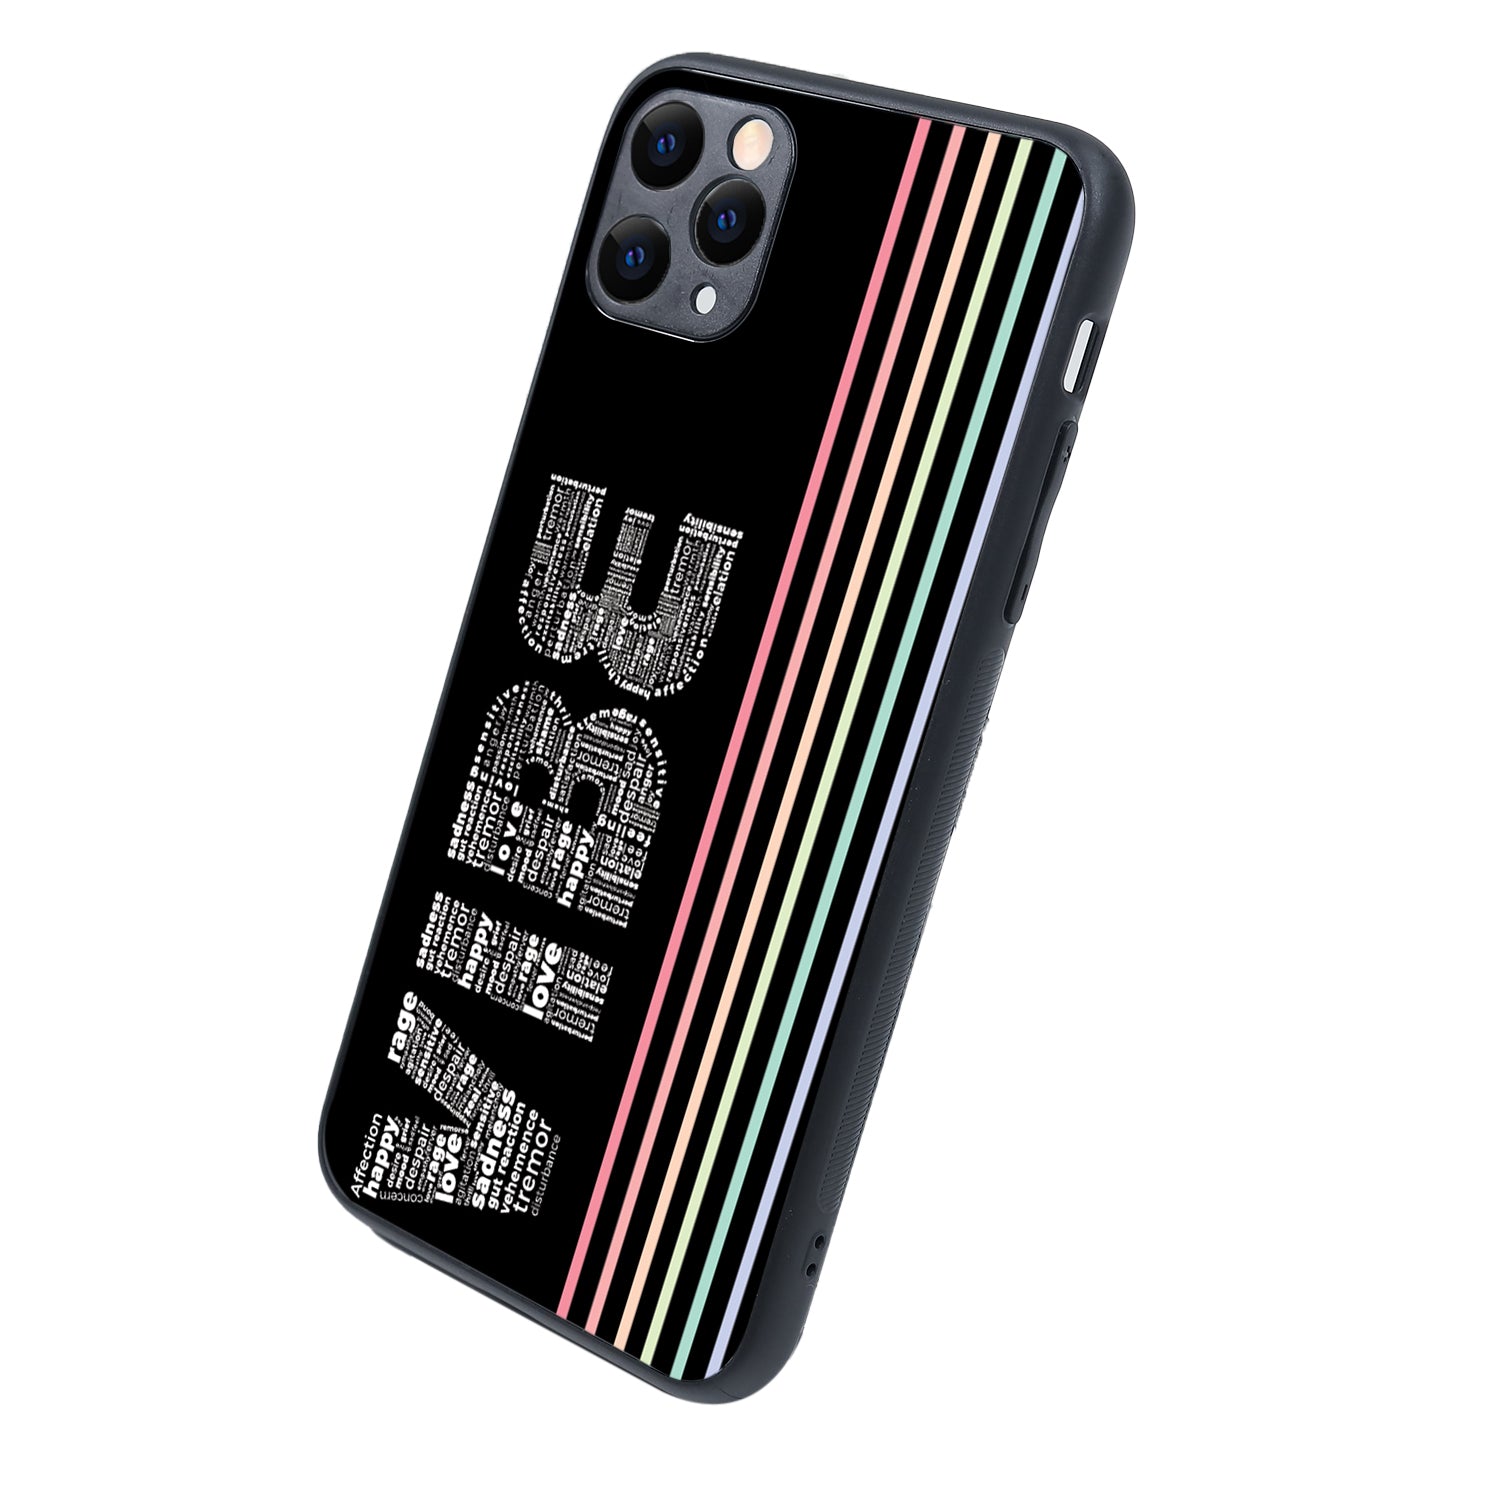 Vibe Motivational Quotes iPhone 11 Pro Max Case